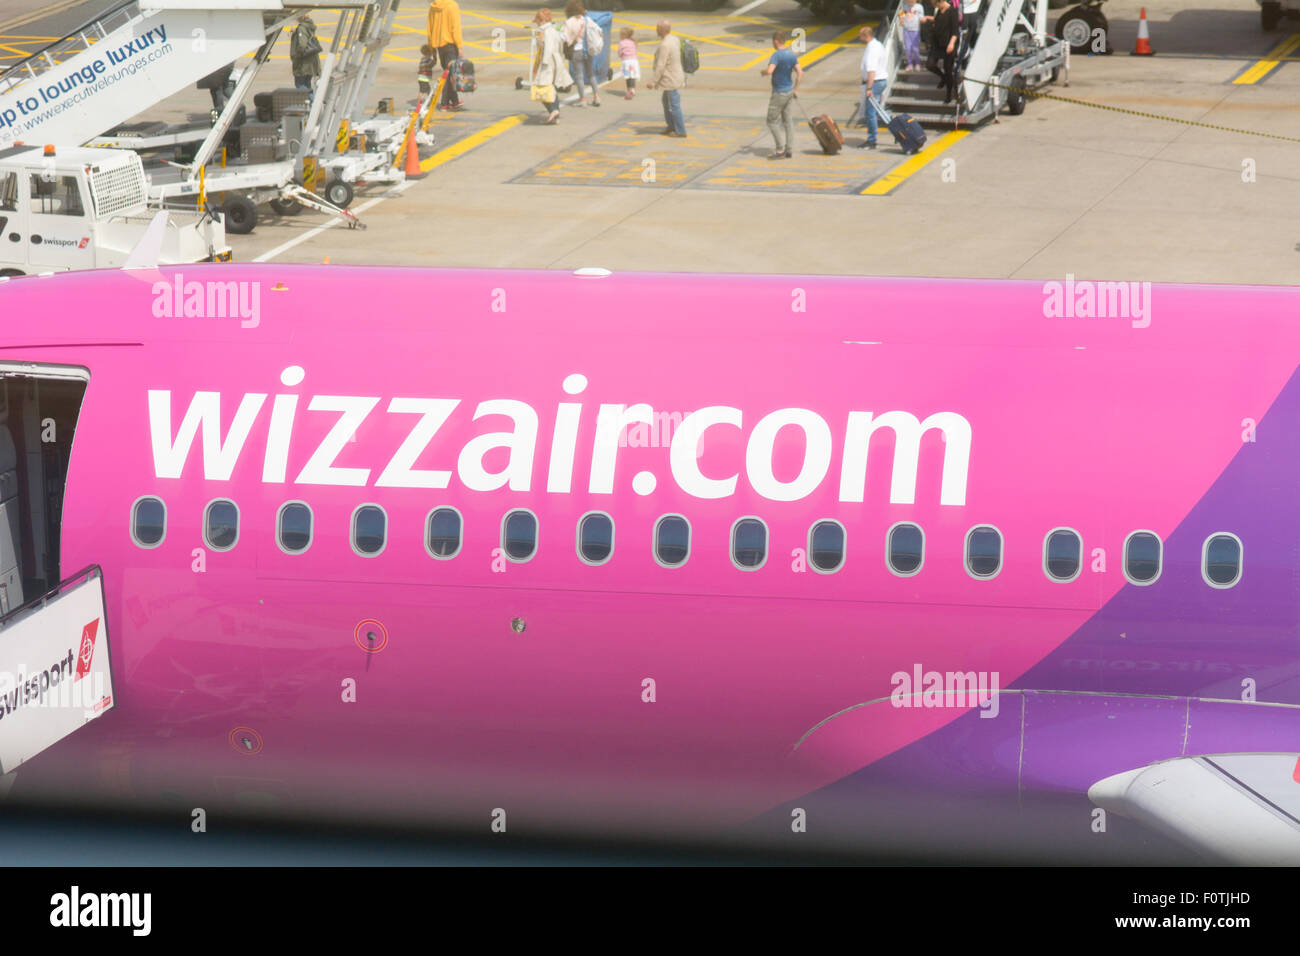 Wizzair.com plane on the ground at Luton Airport with passengers disembarking from plane behind in Luton, Bedfordshire, England Stock Photo